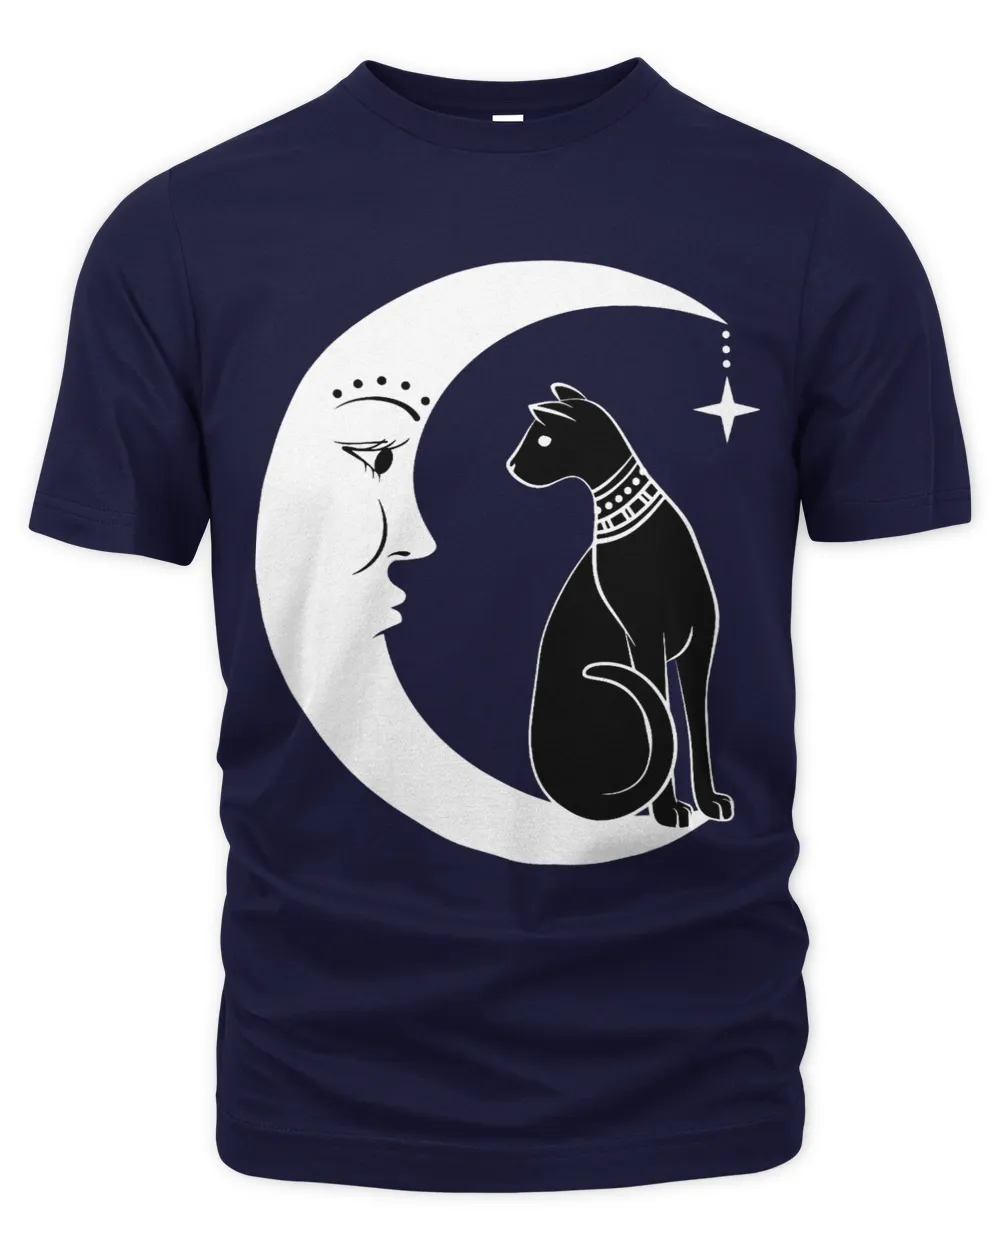 Scary Halloween Black Cat Costume Tarot The Moon and Cat